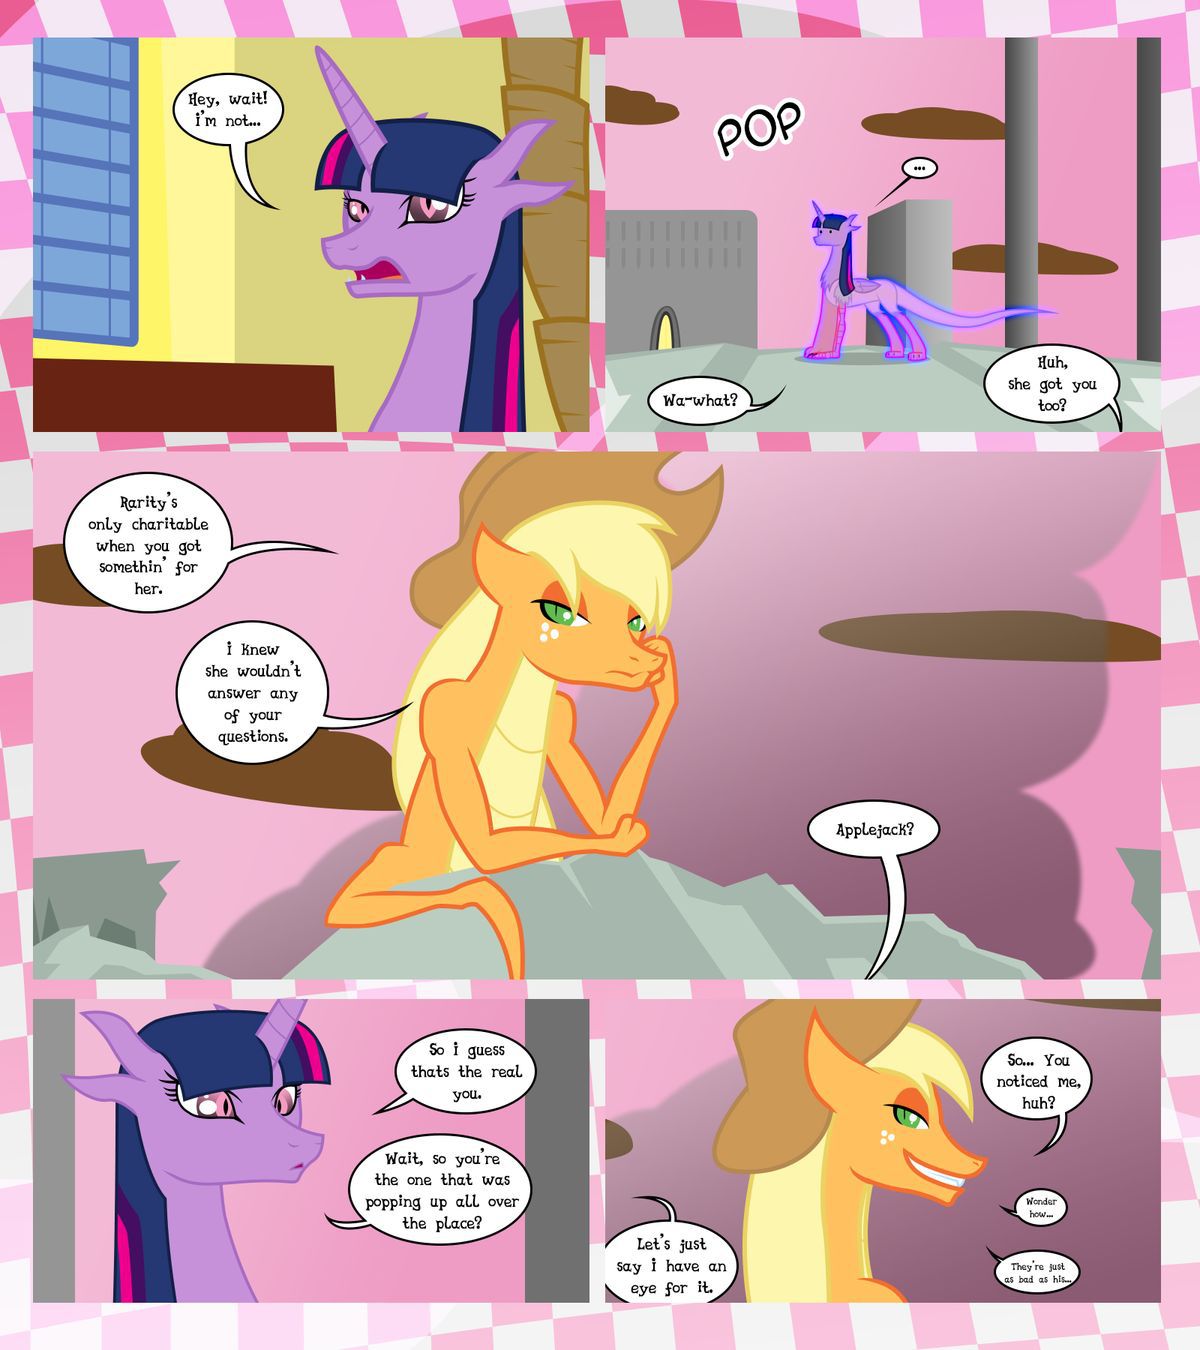 [GatesMcCloud] Cutie Mark Crusaders 10k: Chapter 3 - The Lost (My Little Pony: Friendship is Magic) [English] [Ongoing] 51